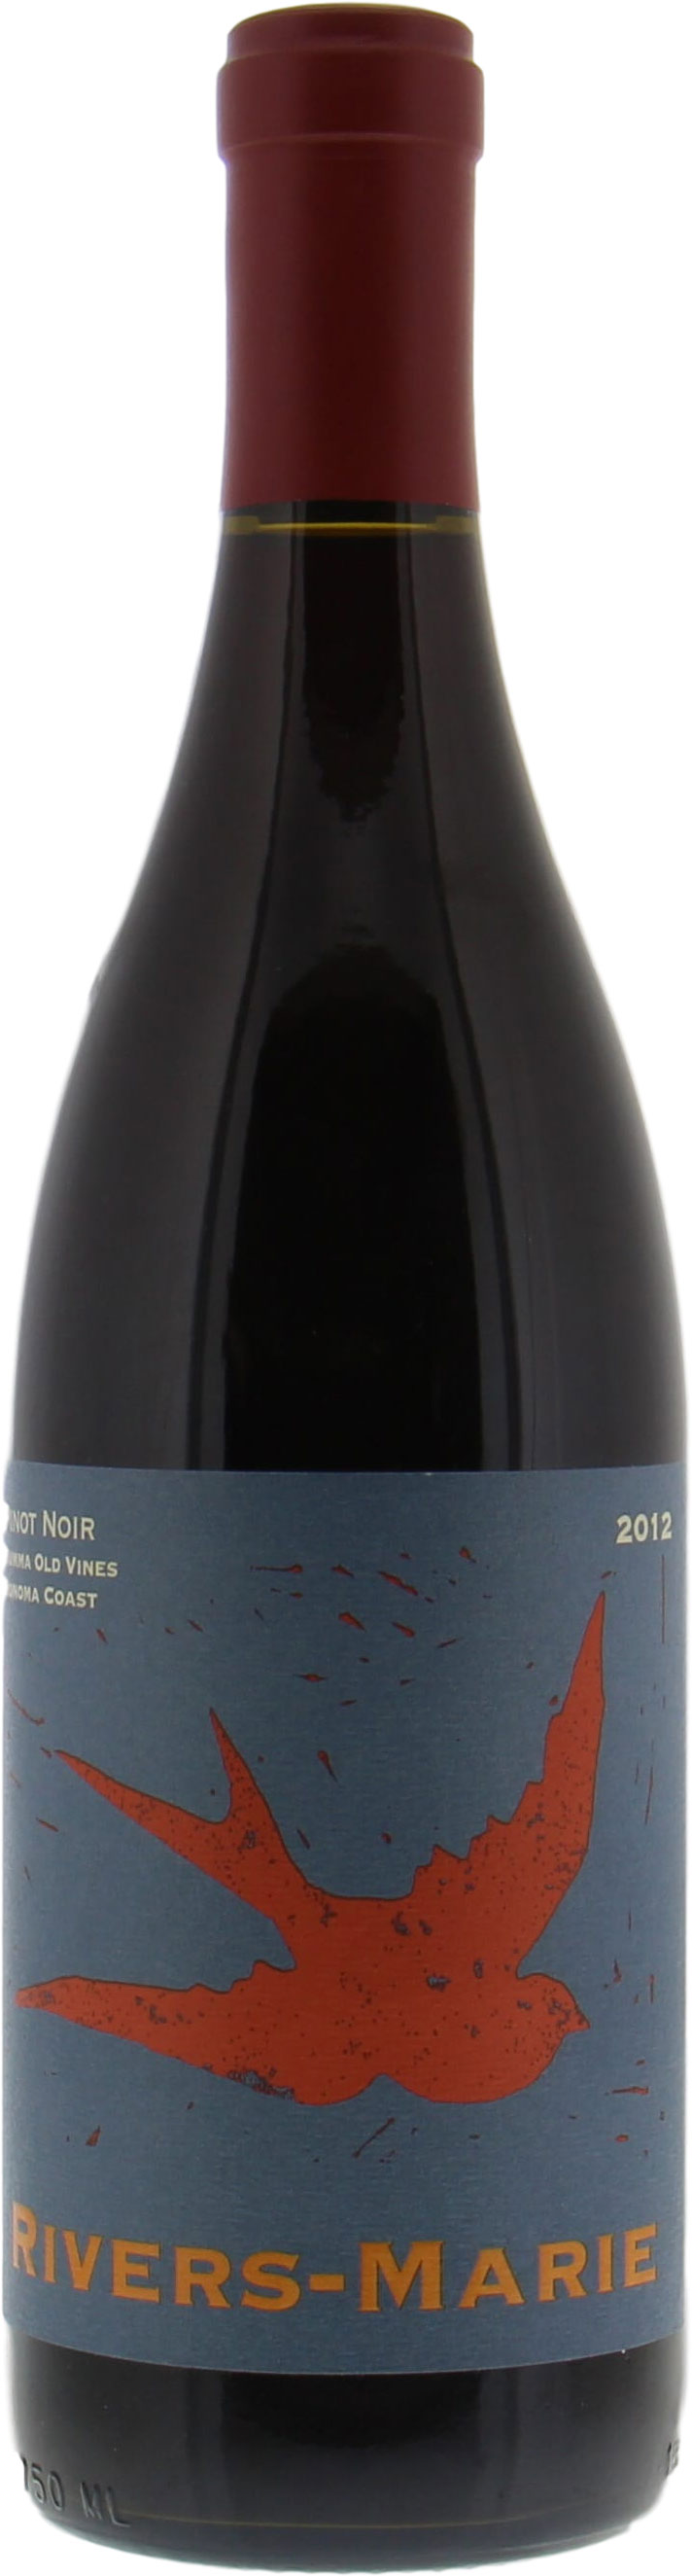 Rivers-Marie  - Pinot Noir Summa Old Vines 2012 Perfect